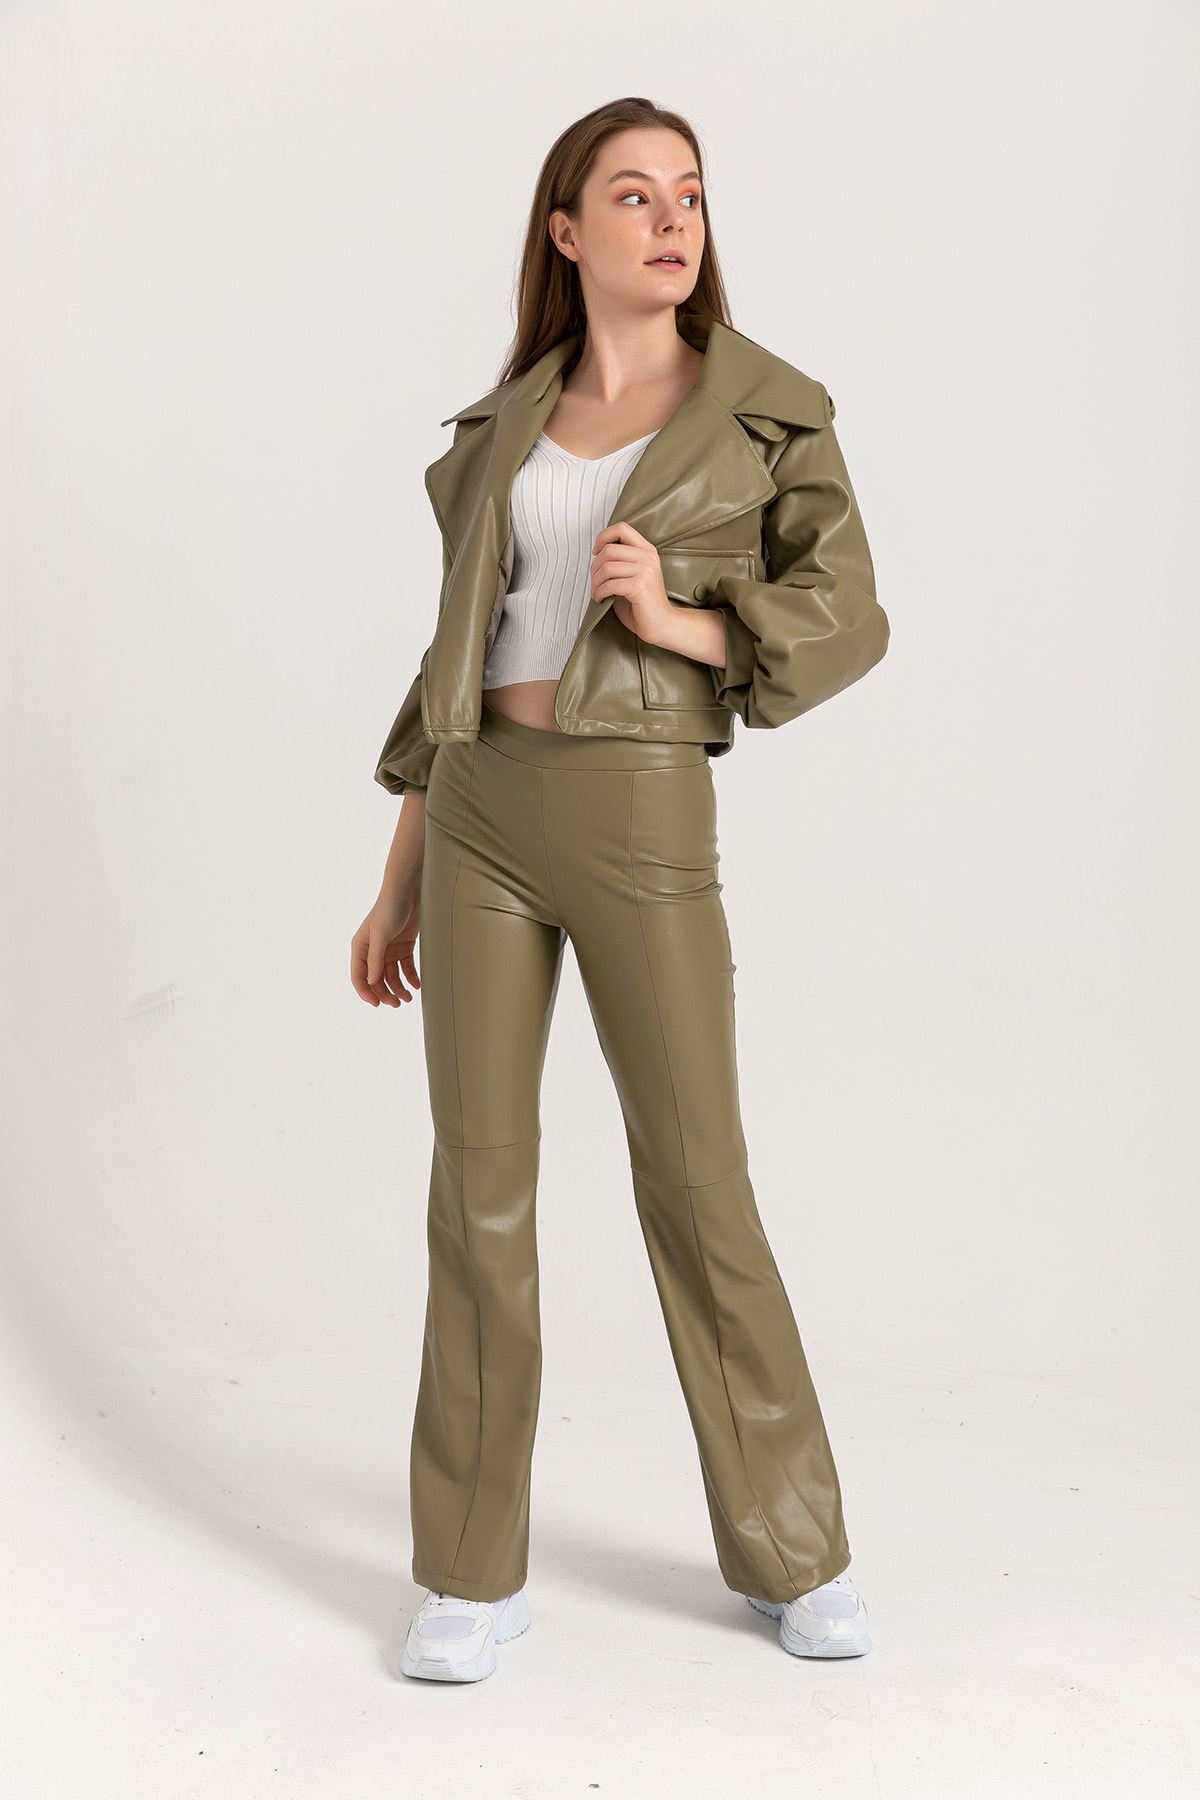 Leather Fabric Long Tigth Fit Flare Women'S Trouser - Khaki 